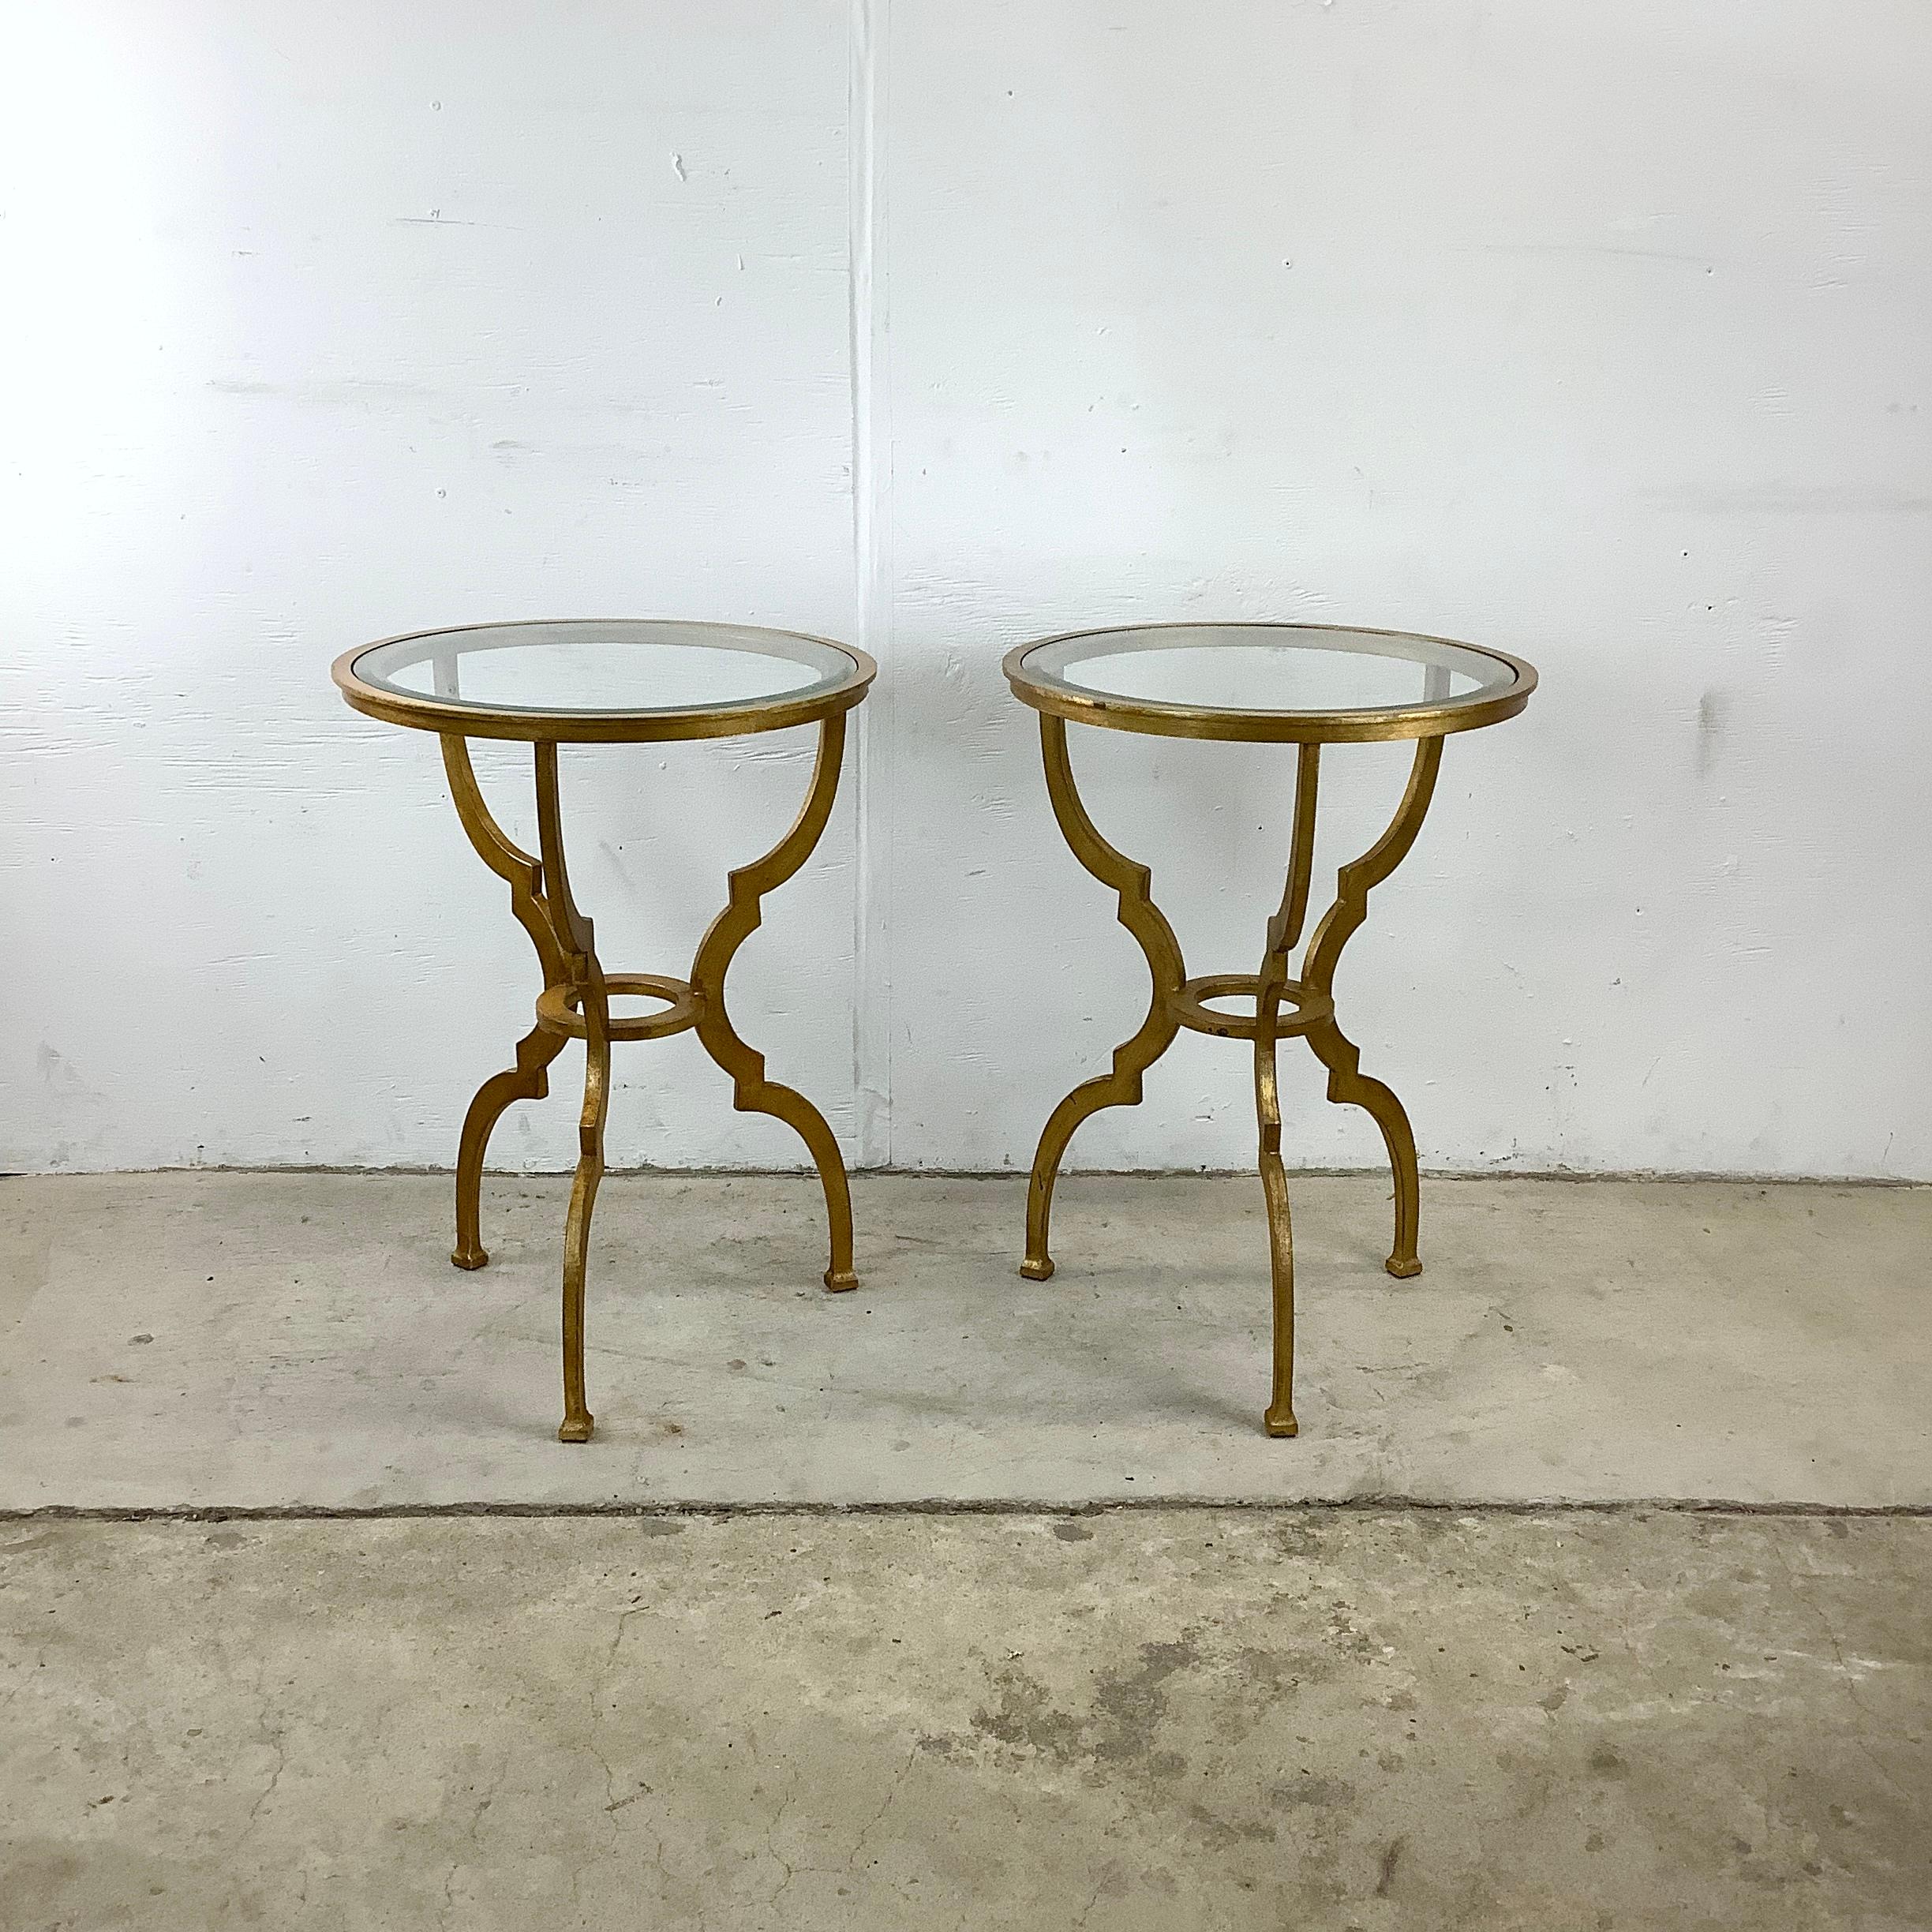 Step back in time with these vintage gilt side tables, a pair that exudes the elegance and charm of a bygone era. Each table stands on sculpted gilt legs, their curves and contours reminiscent of classic European design, bringing an air of